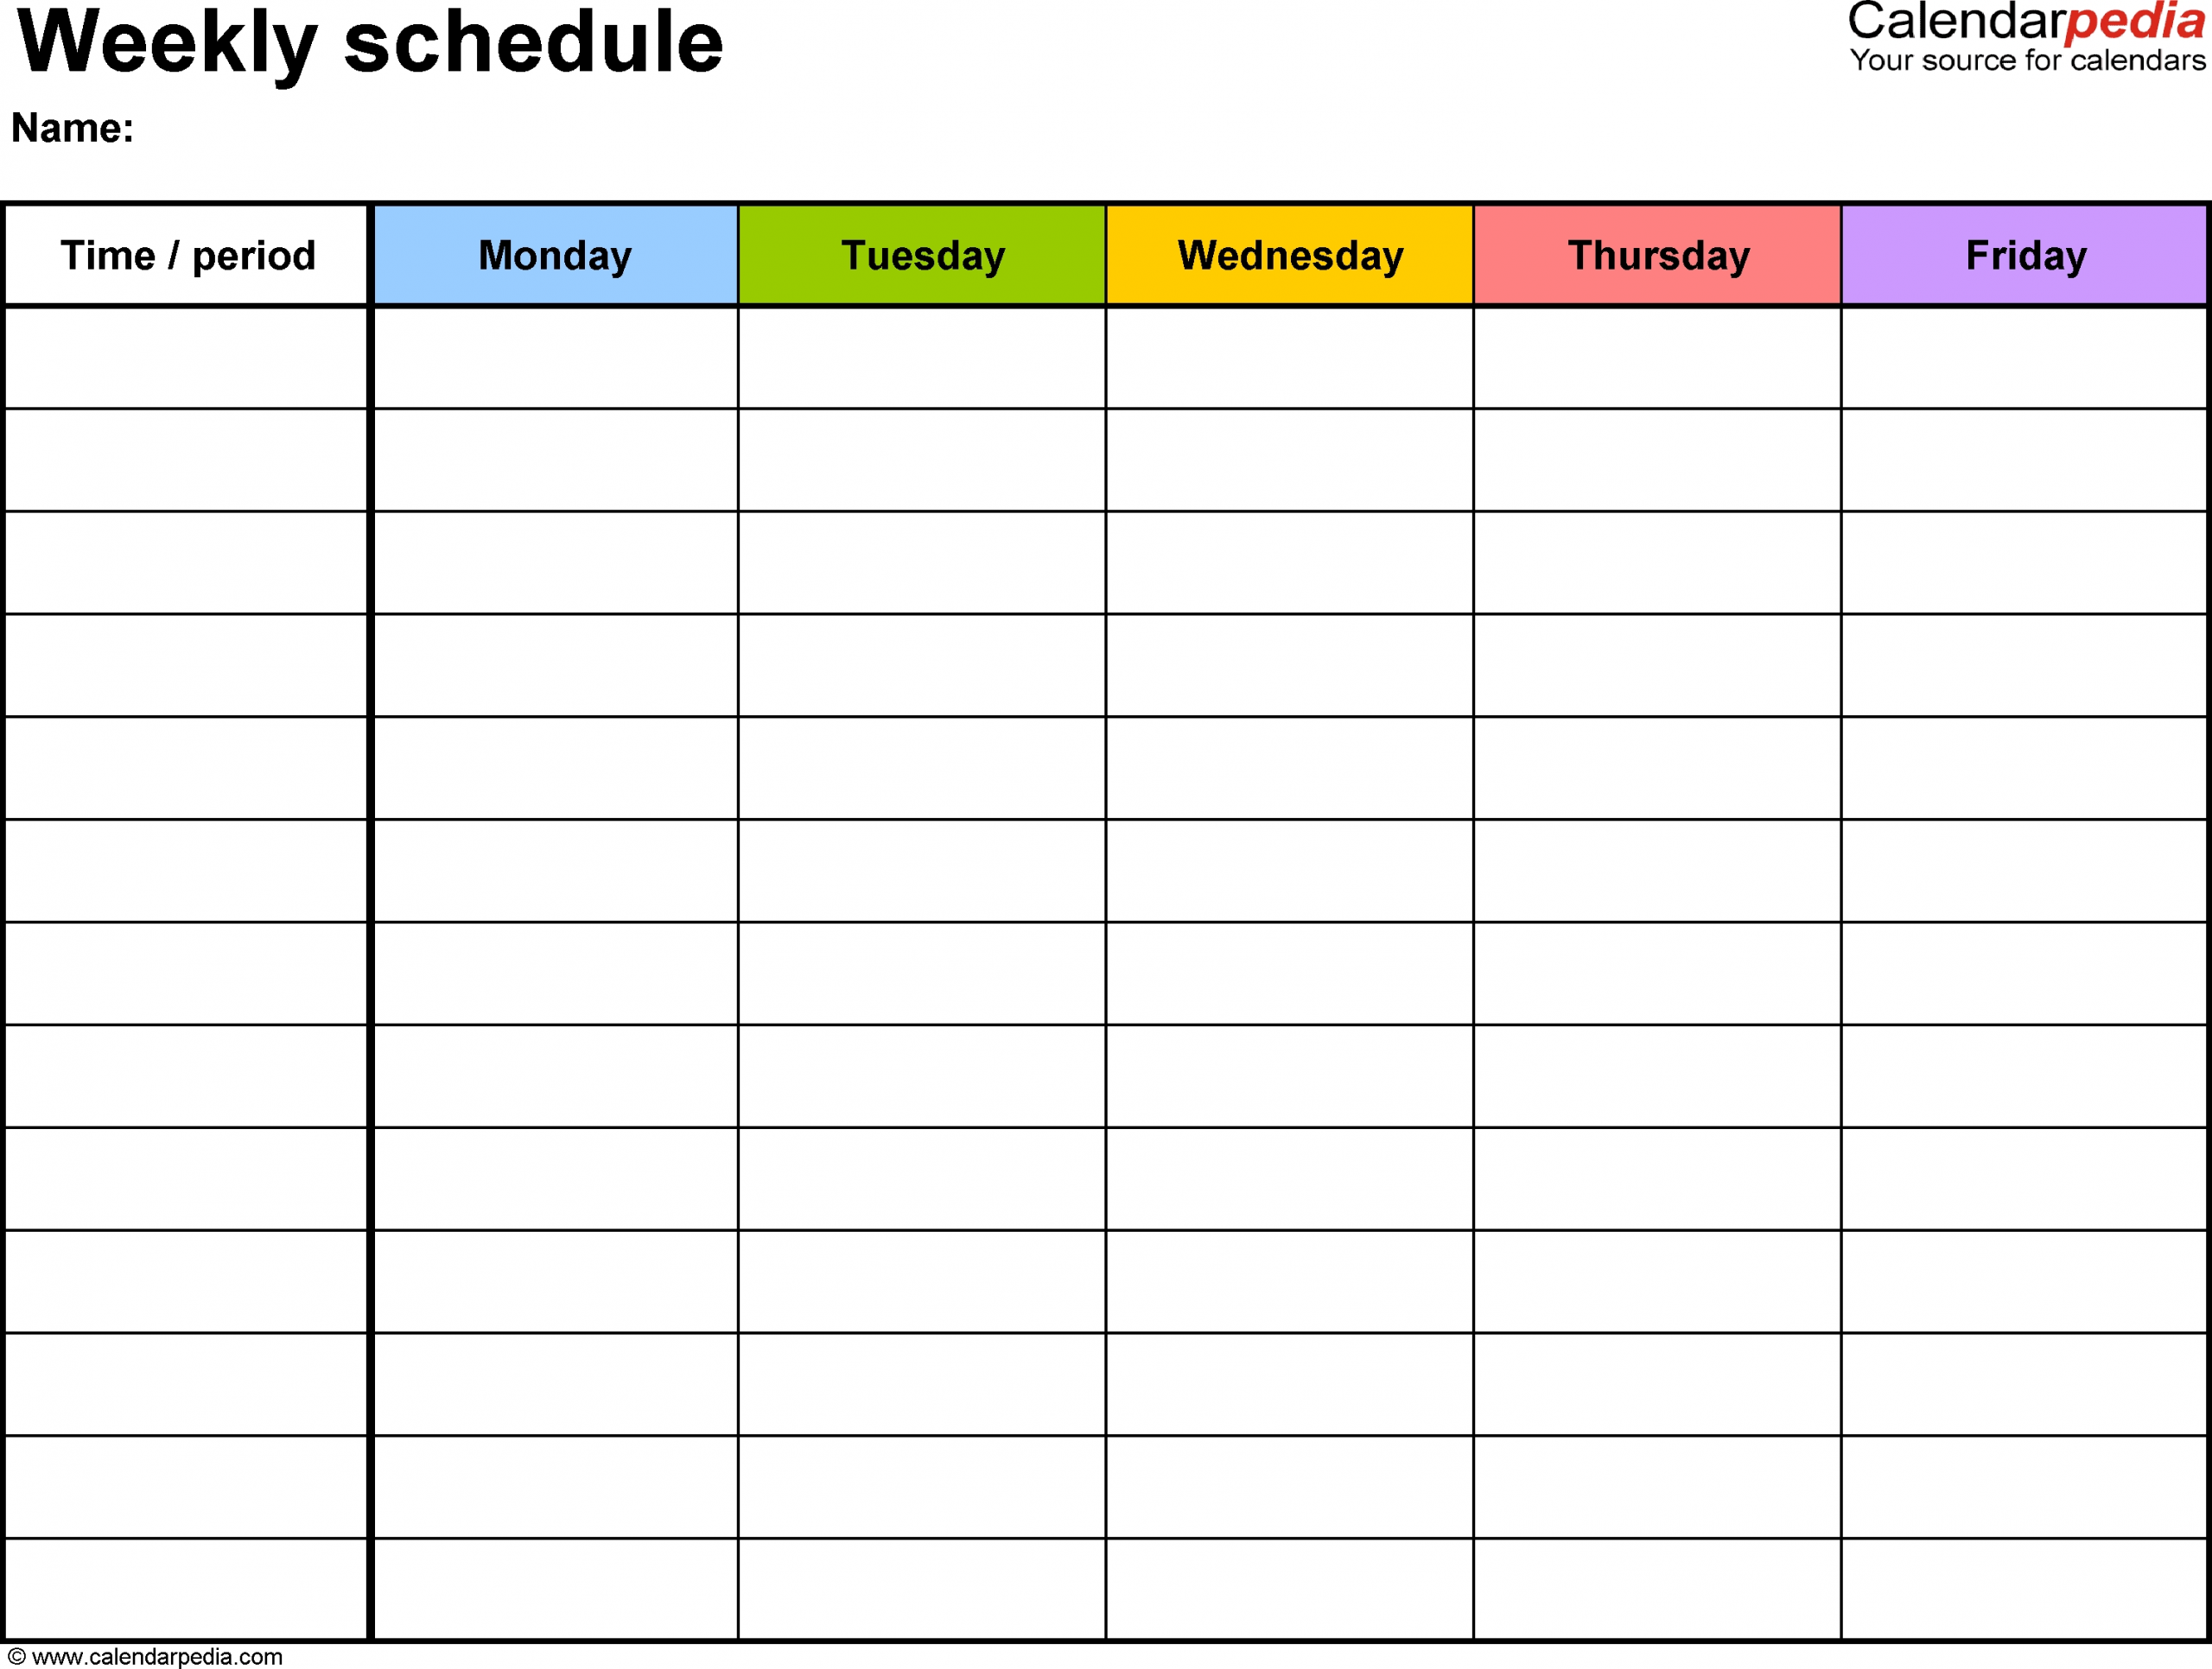 Free Weekly Schedule Templates For Word - 18 Templates with Blank Weekly Calendar To Fill In